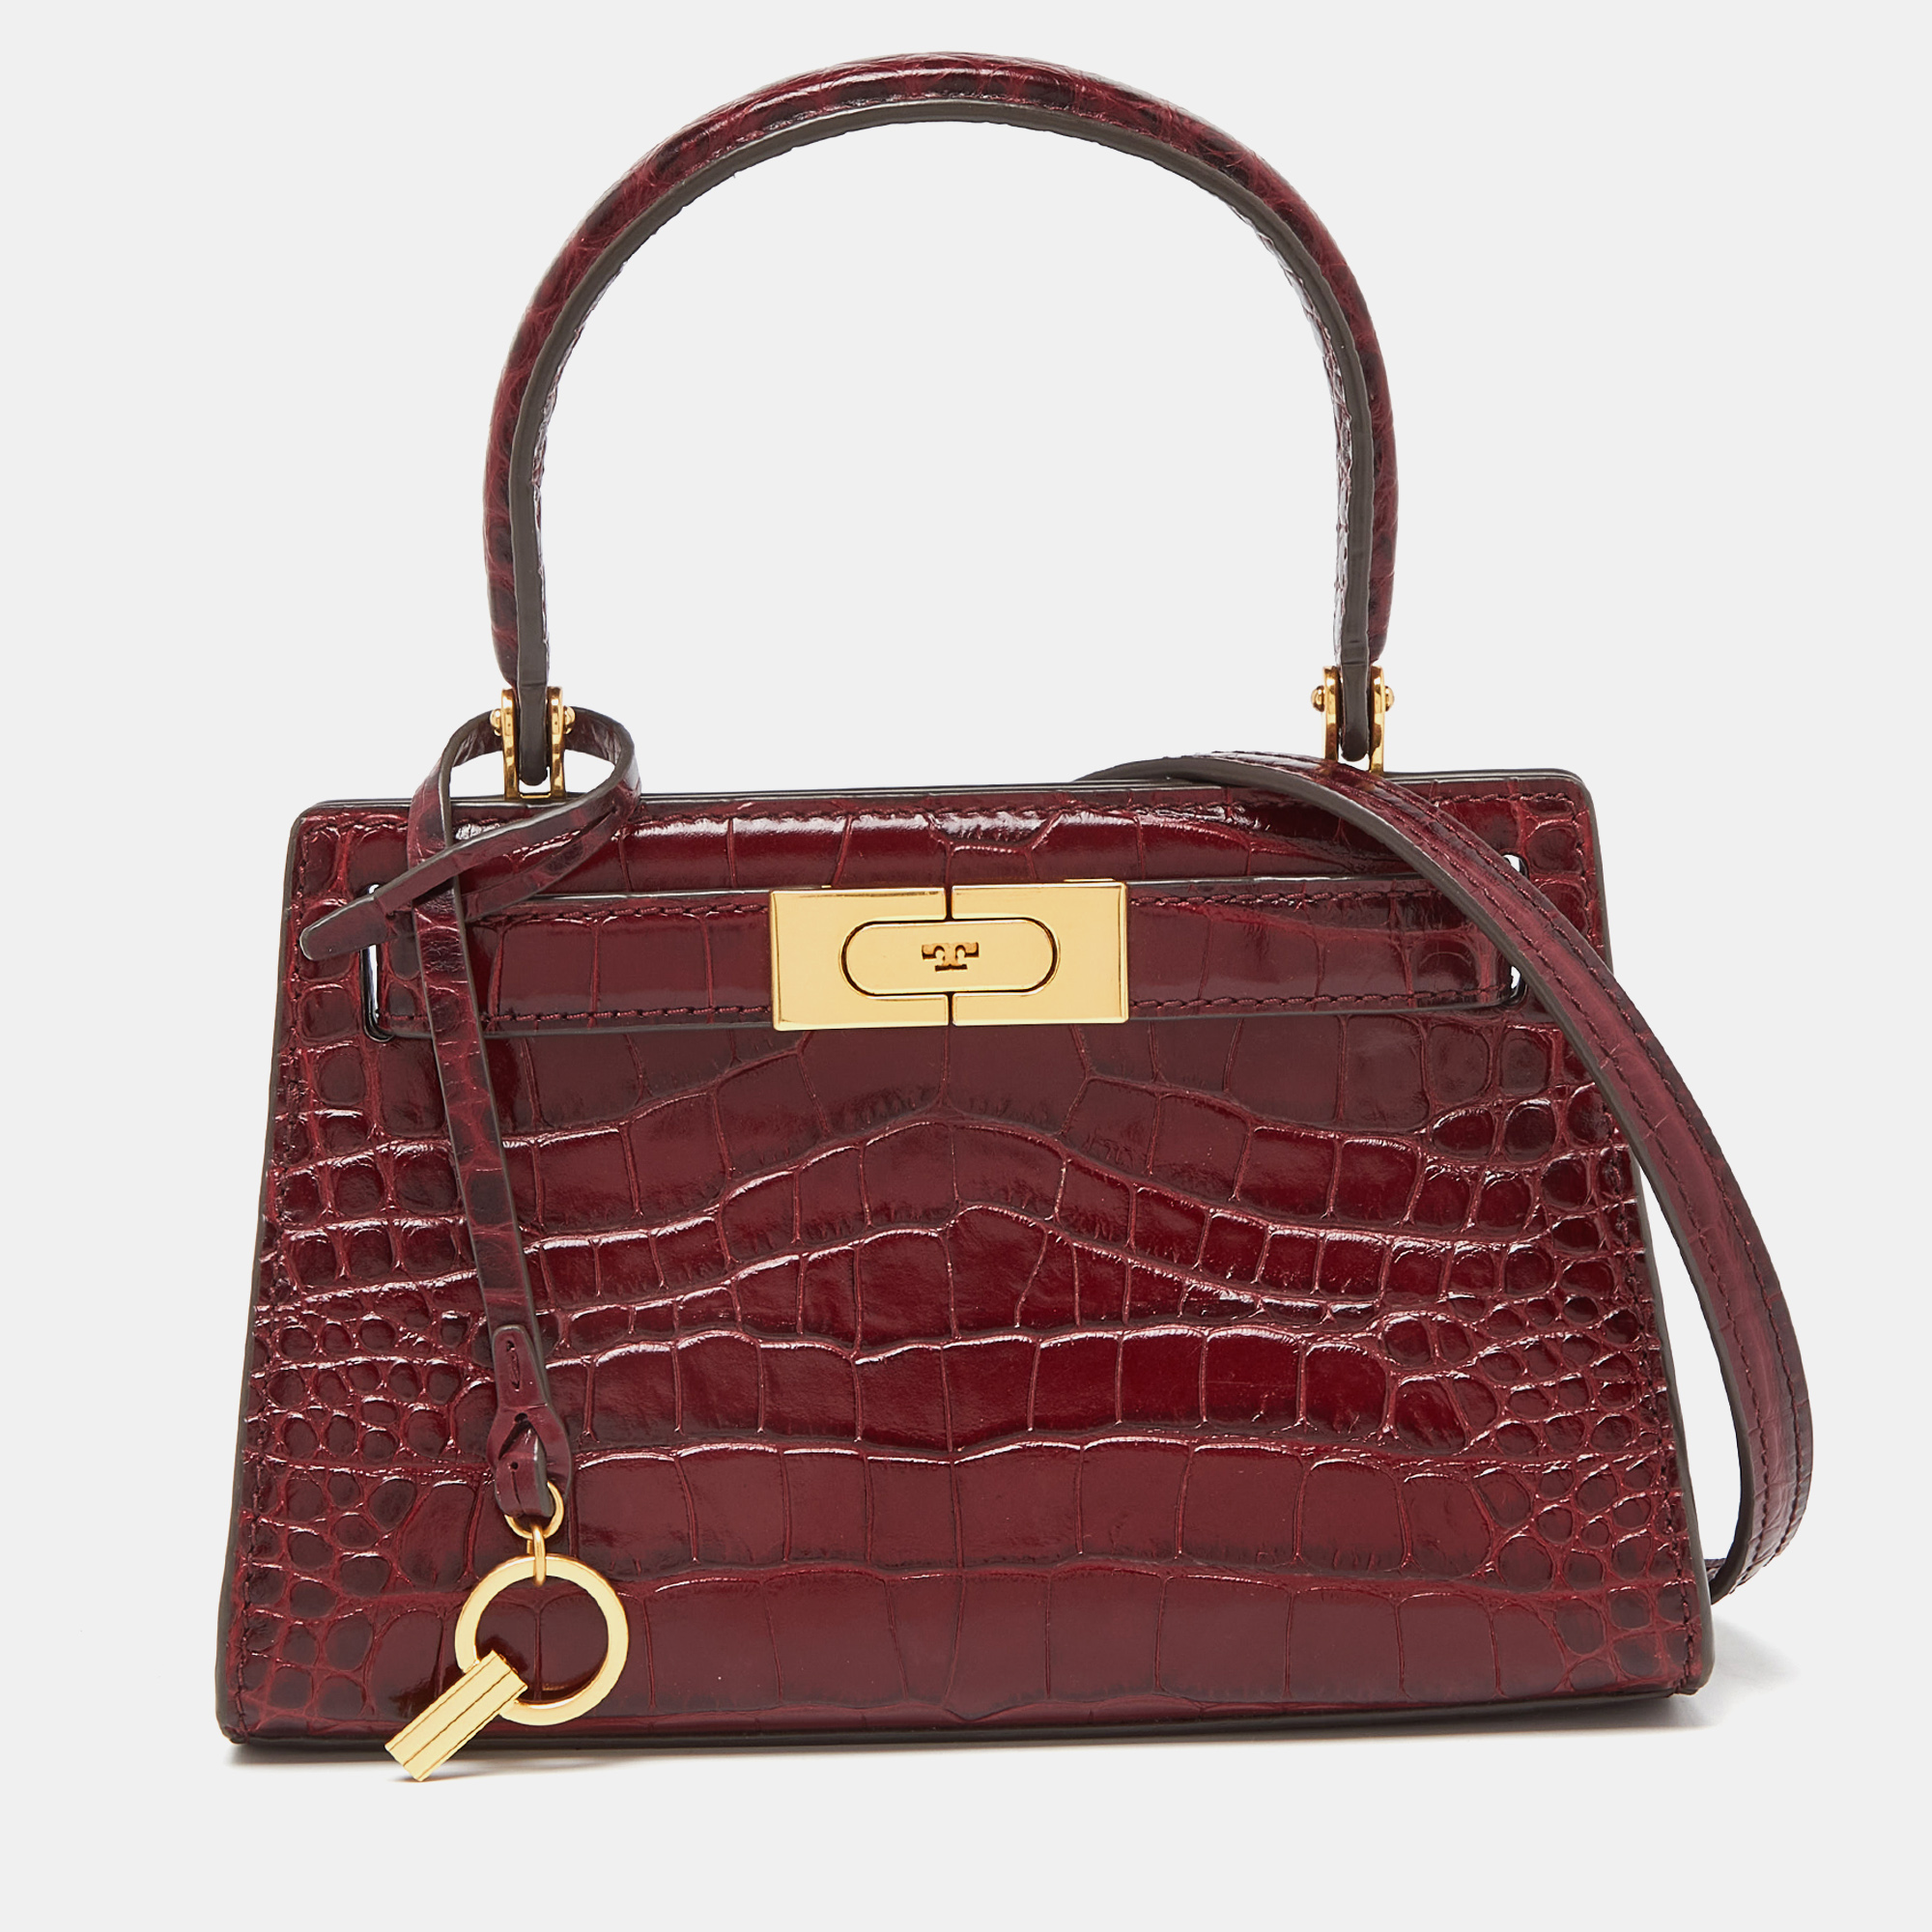 

Tory Burch Red Croc Embossed Leather Petite Lee Radziwill Top Handle Bag